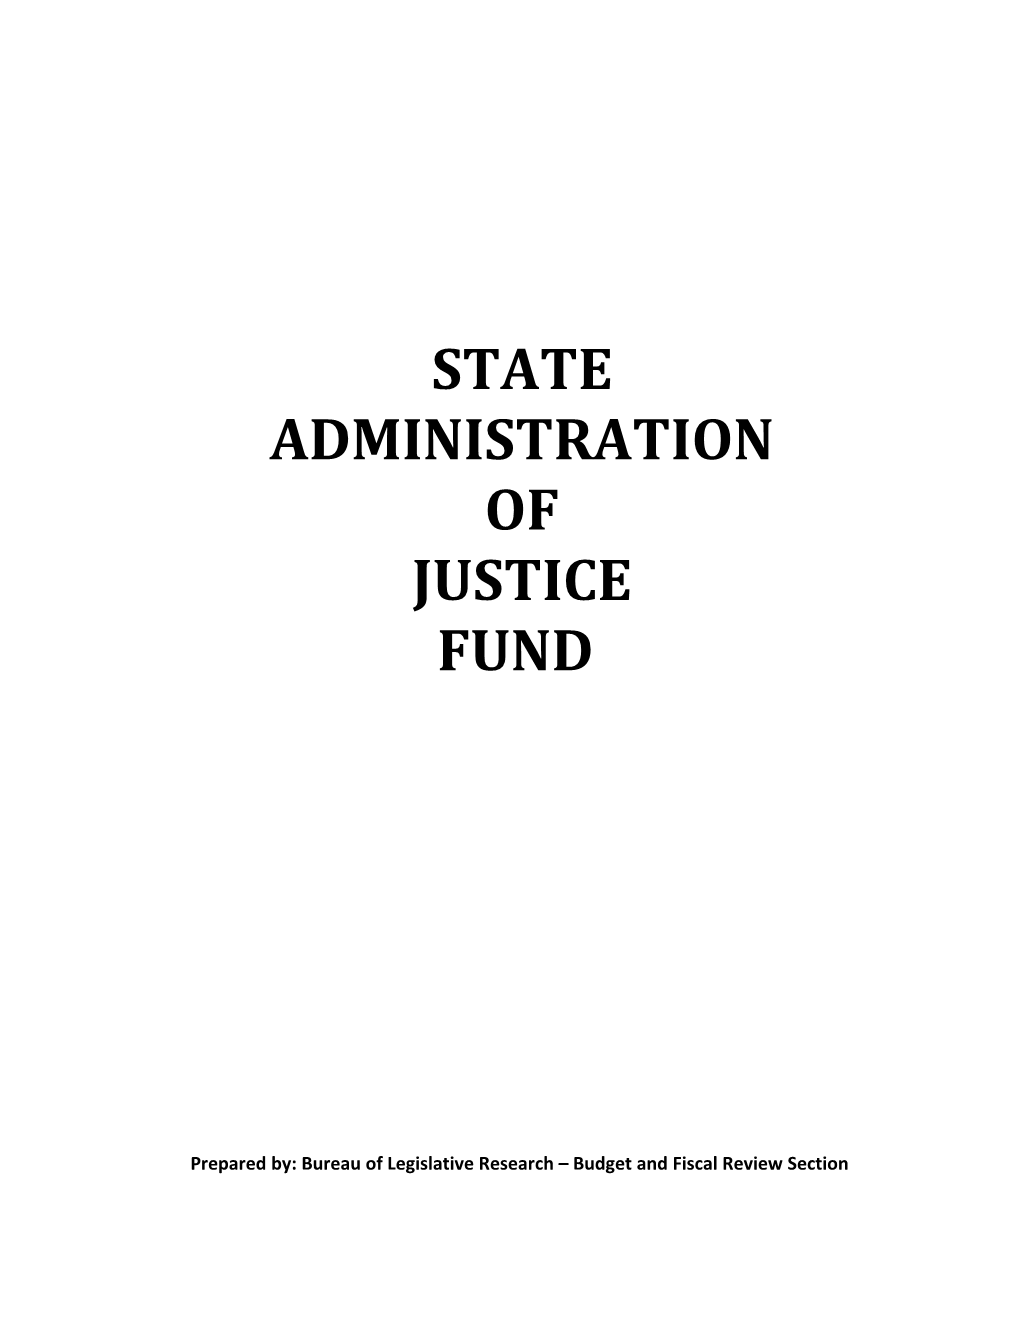 State Administration of Justice Fund